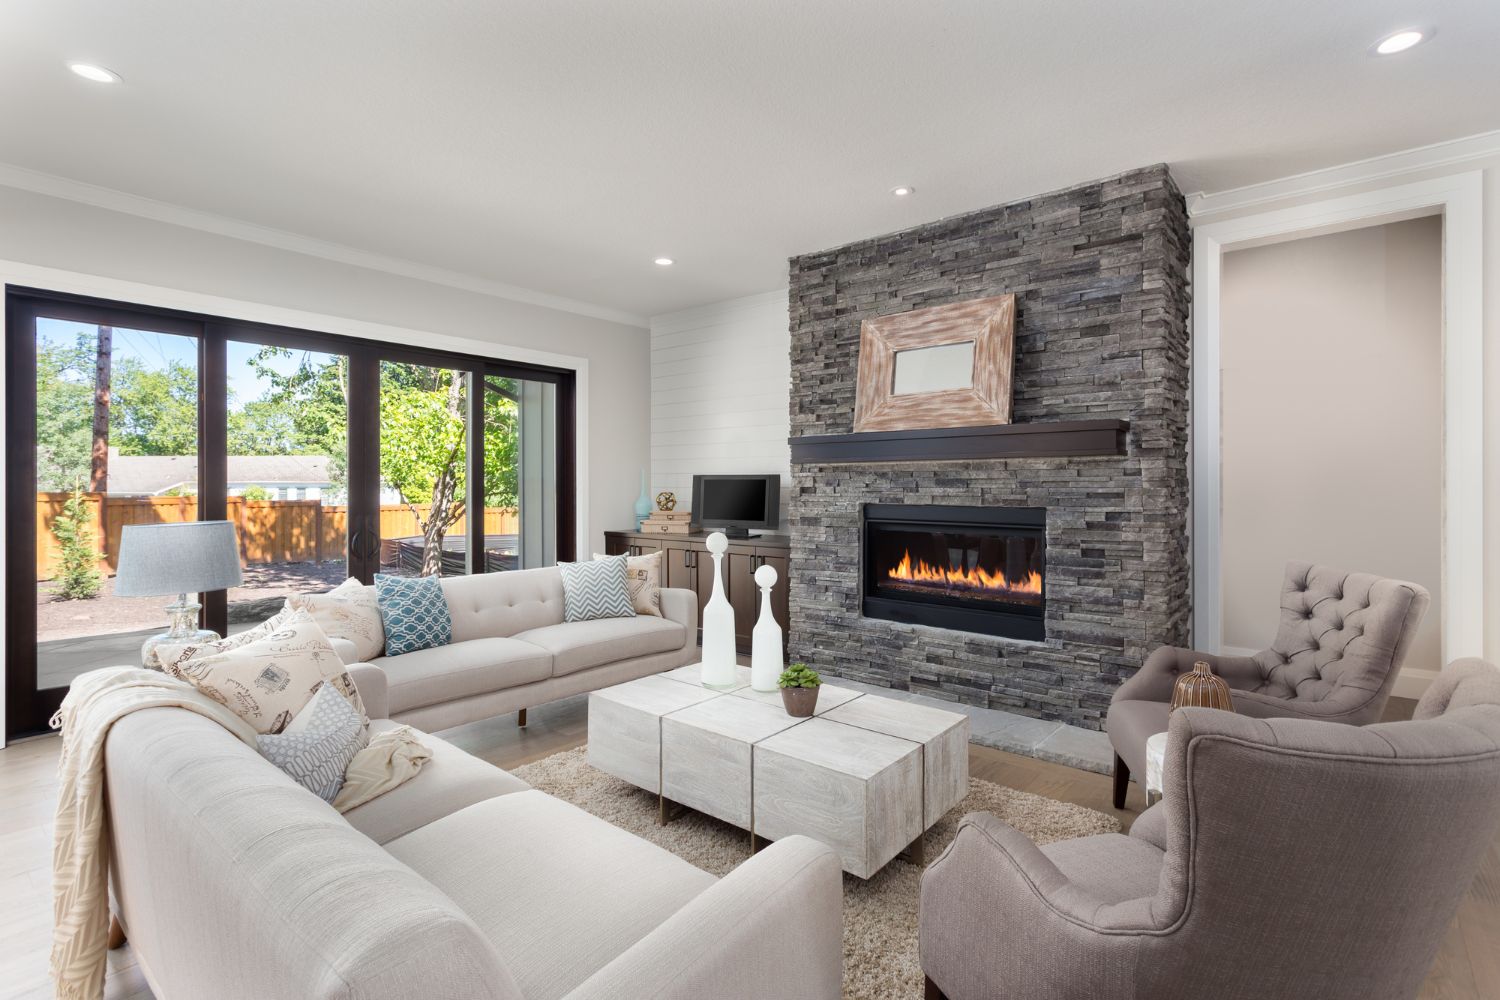 Creating a warm and cosy atmosphere for winter home sales